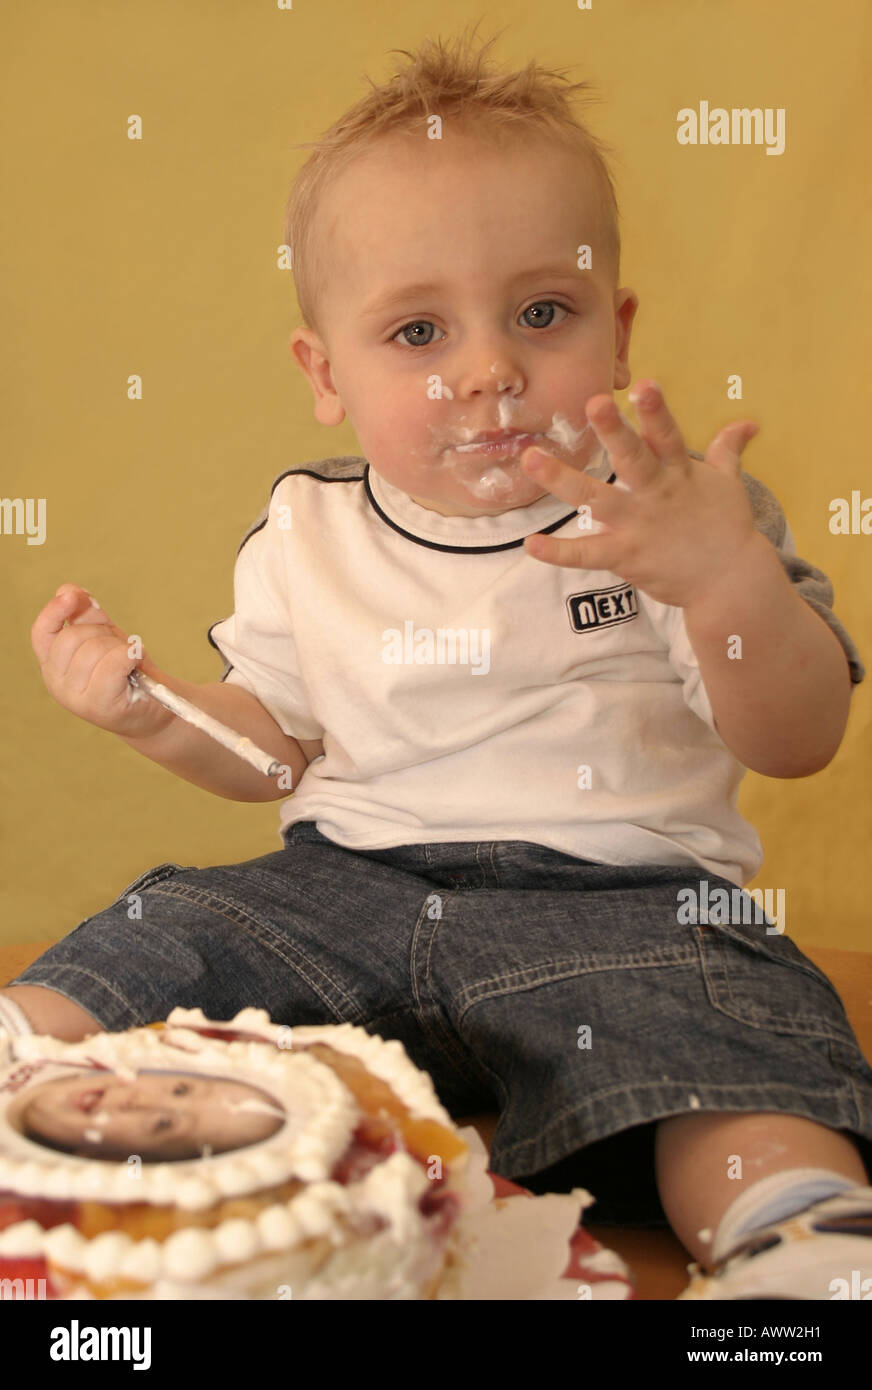 Smudged Little Boy with Birthday Cake Stock Photo